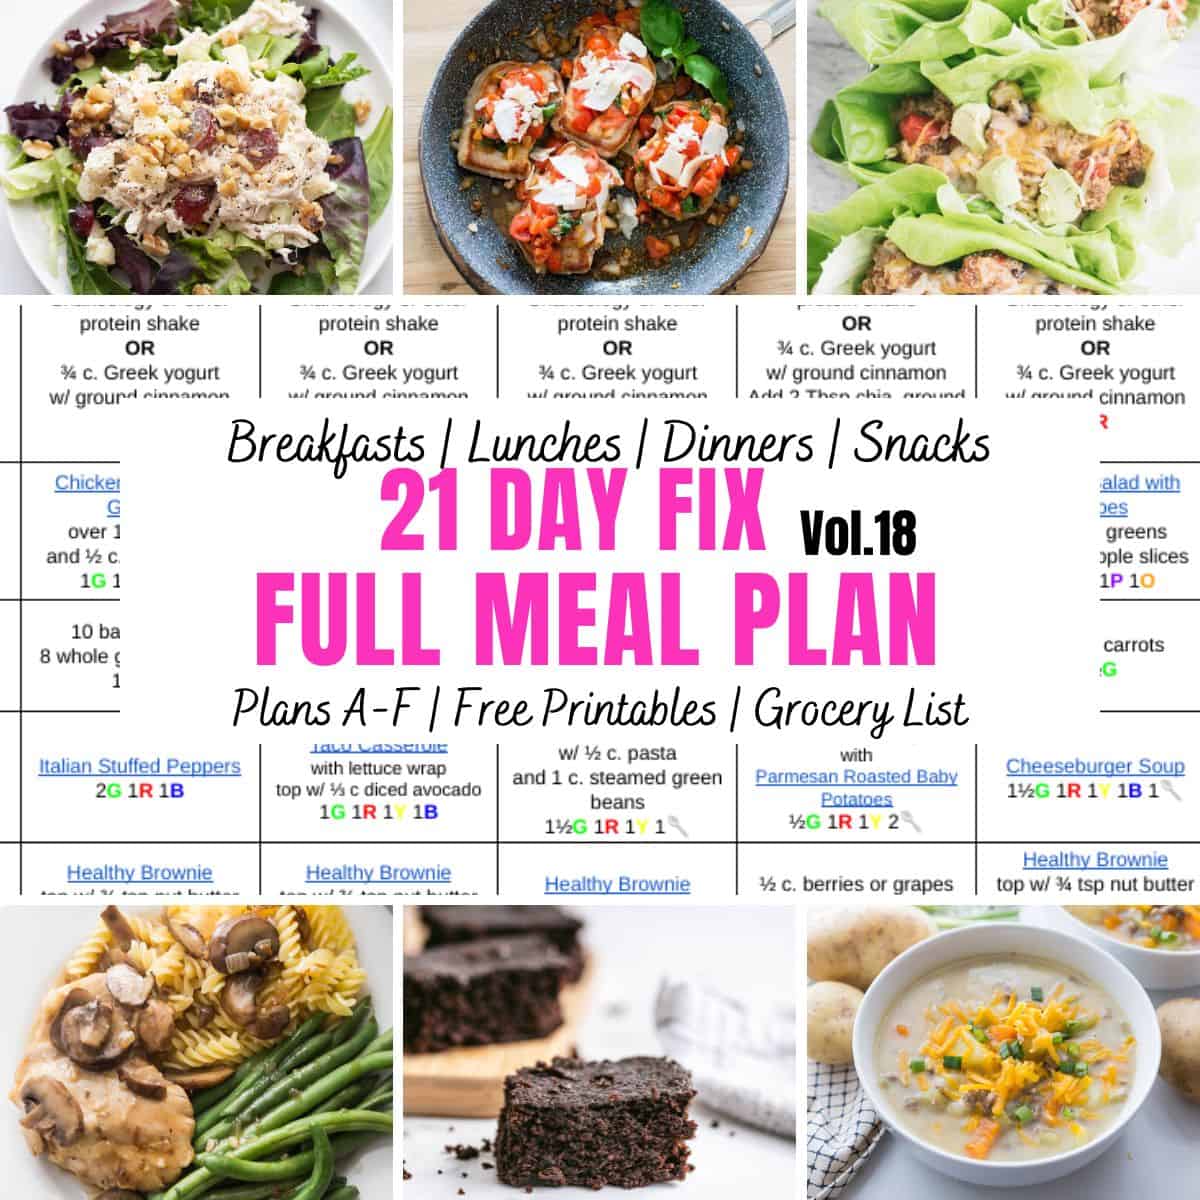 Food photo collage with pink and black text on a white background. Text says, "21 Day Fix Full Meal Plan Vol.18"